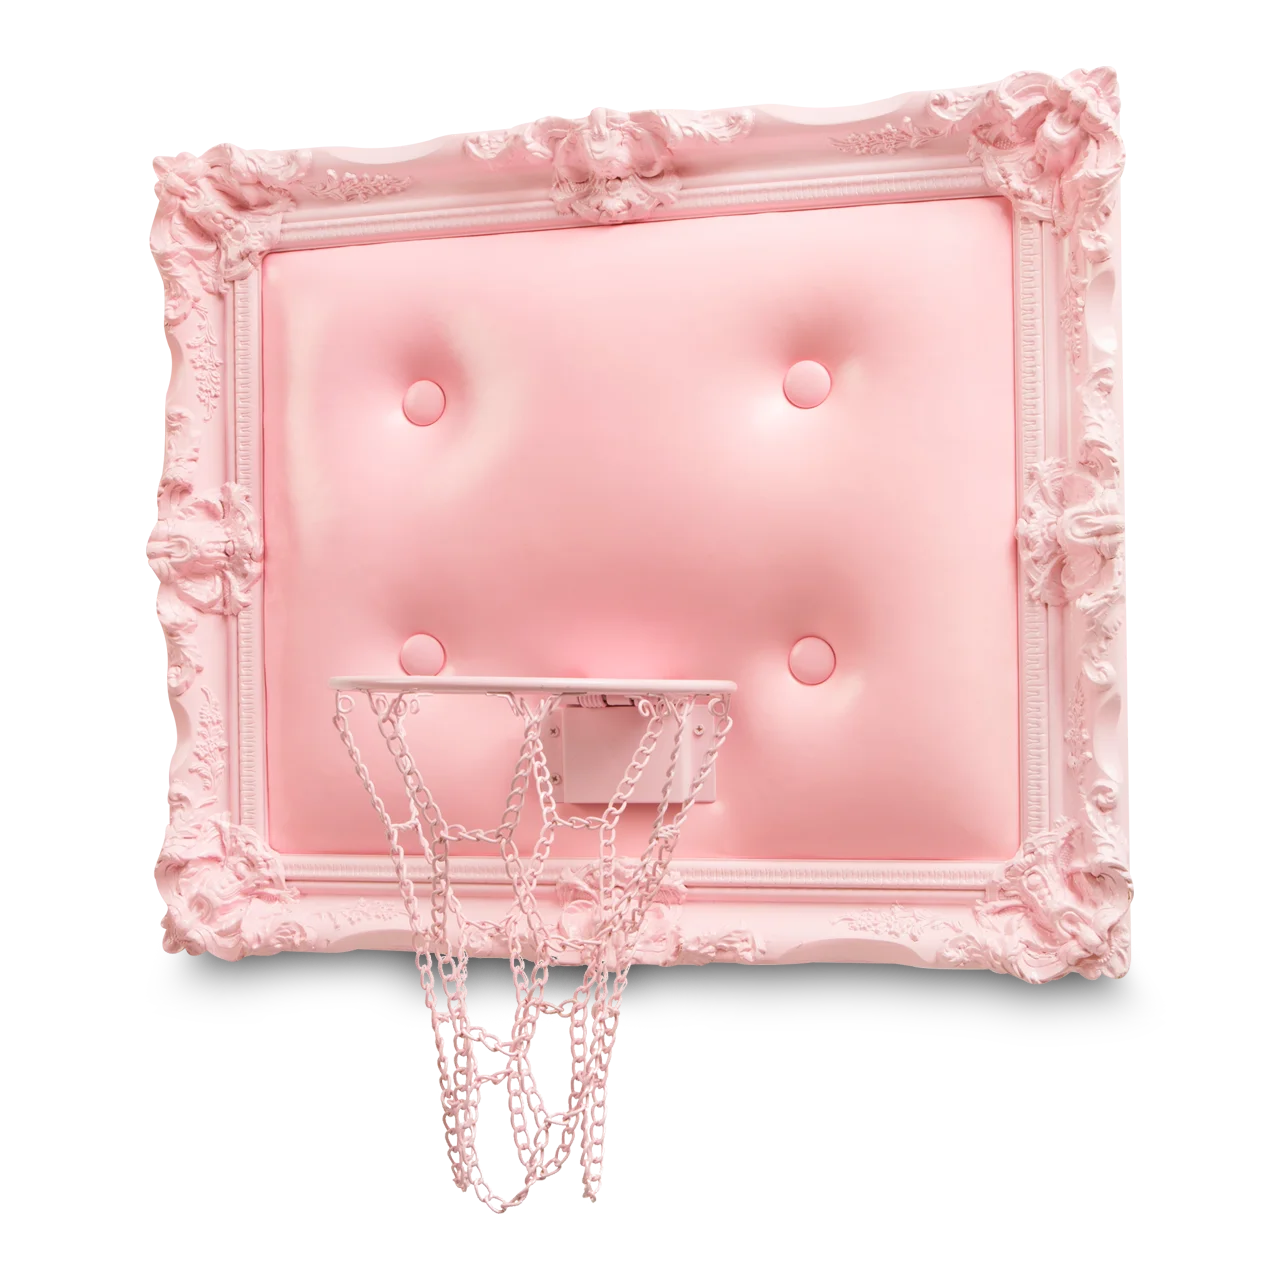 A Pink Leather Hoop adorned with an ornate frame.